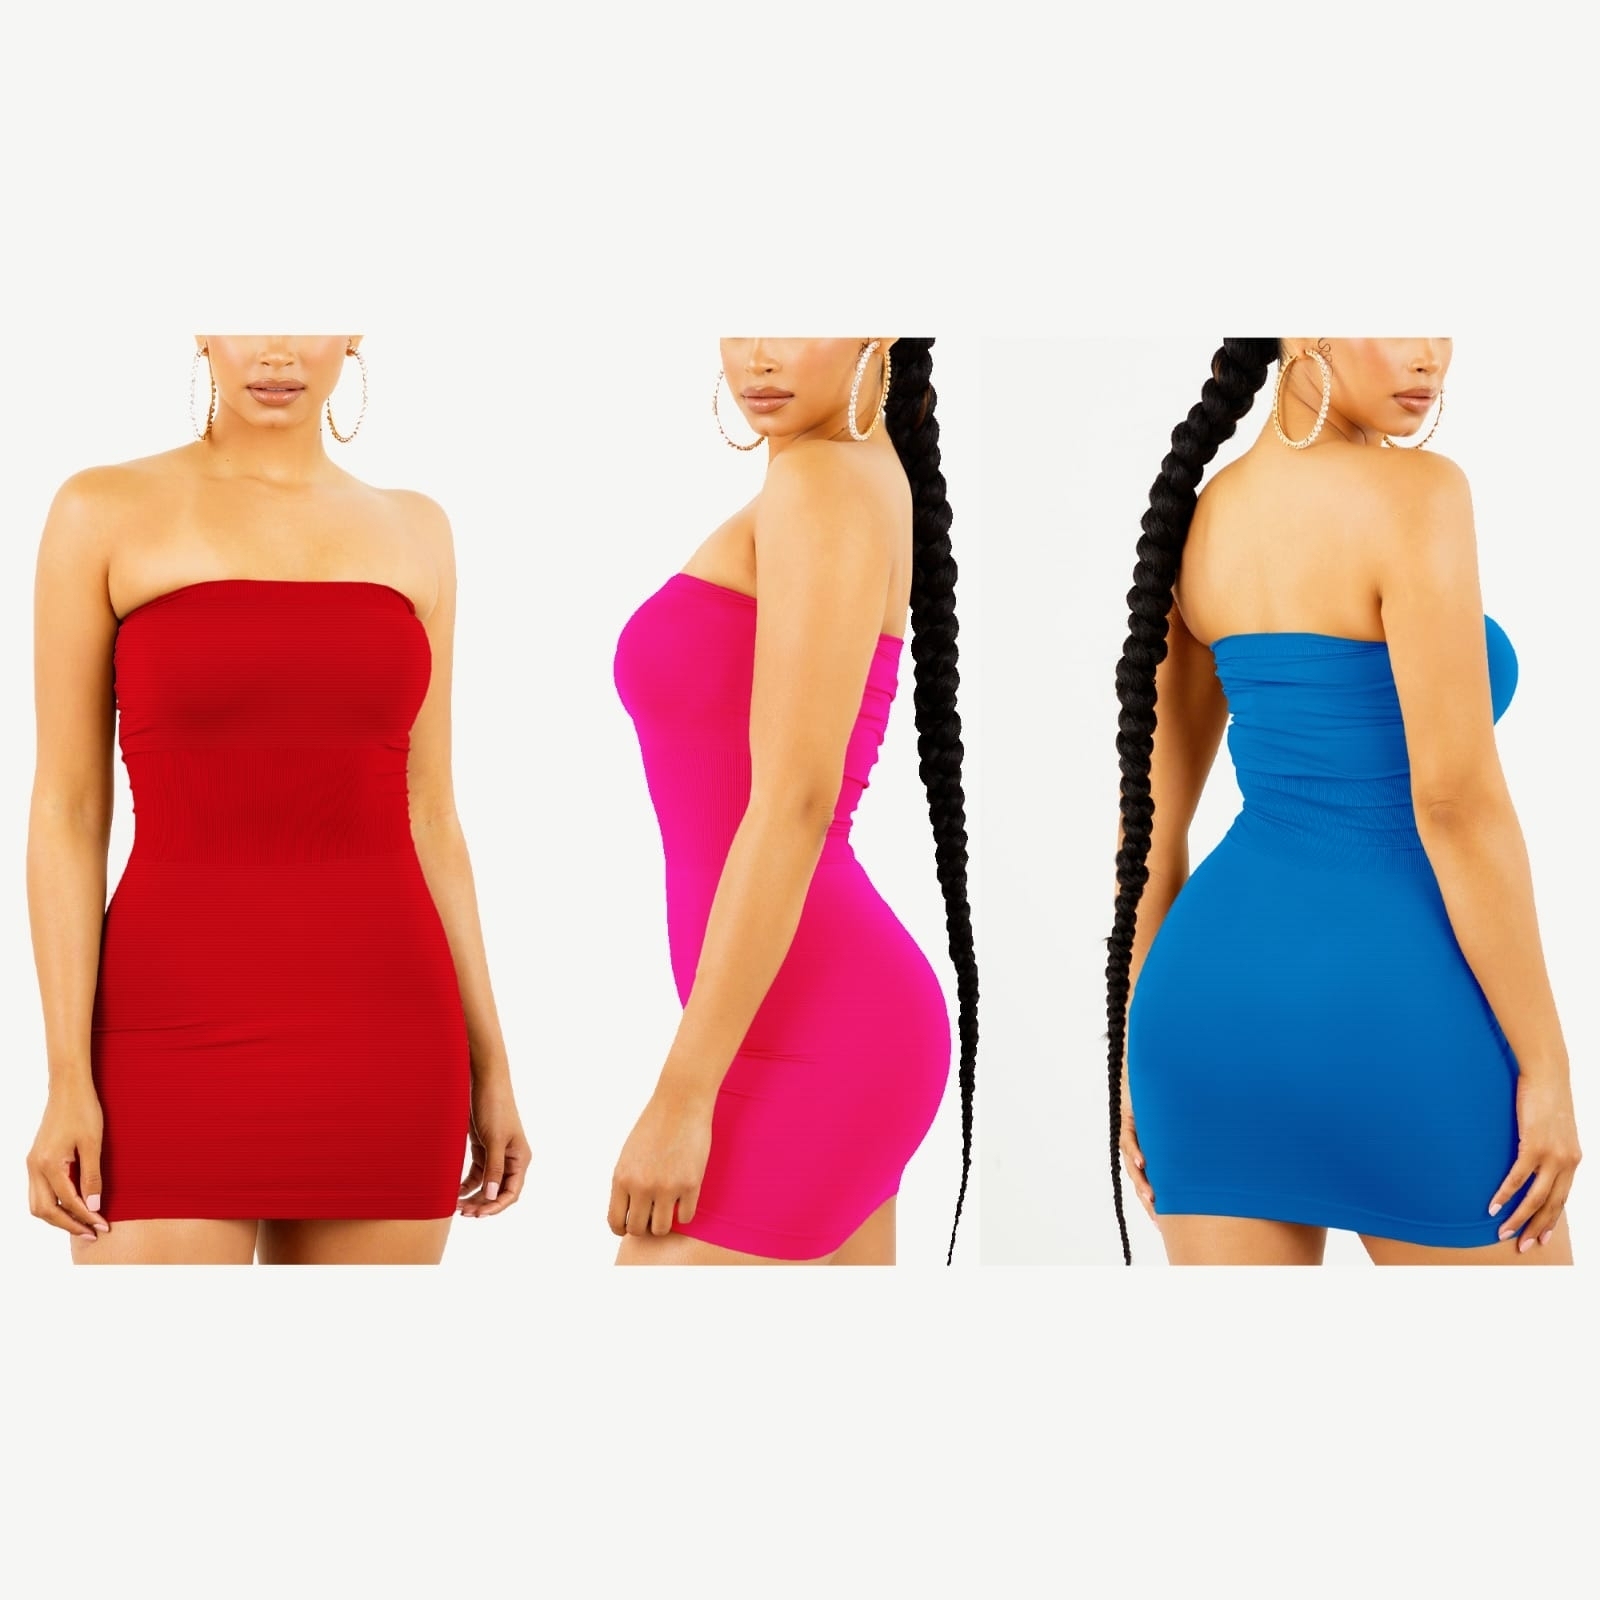 2-Pack Women's Strapless Stretchy Tight Fit Seamless Body Con Mini Tube Top Dress - RED, L